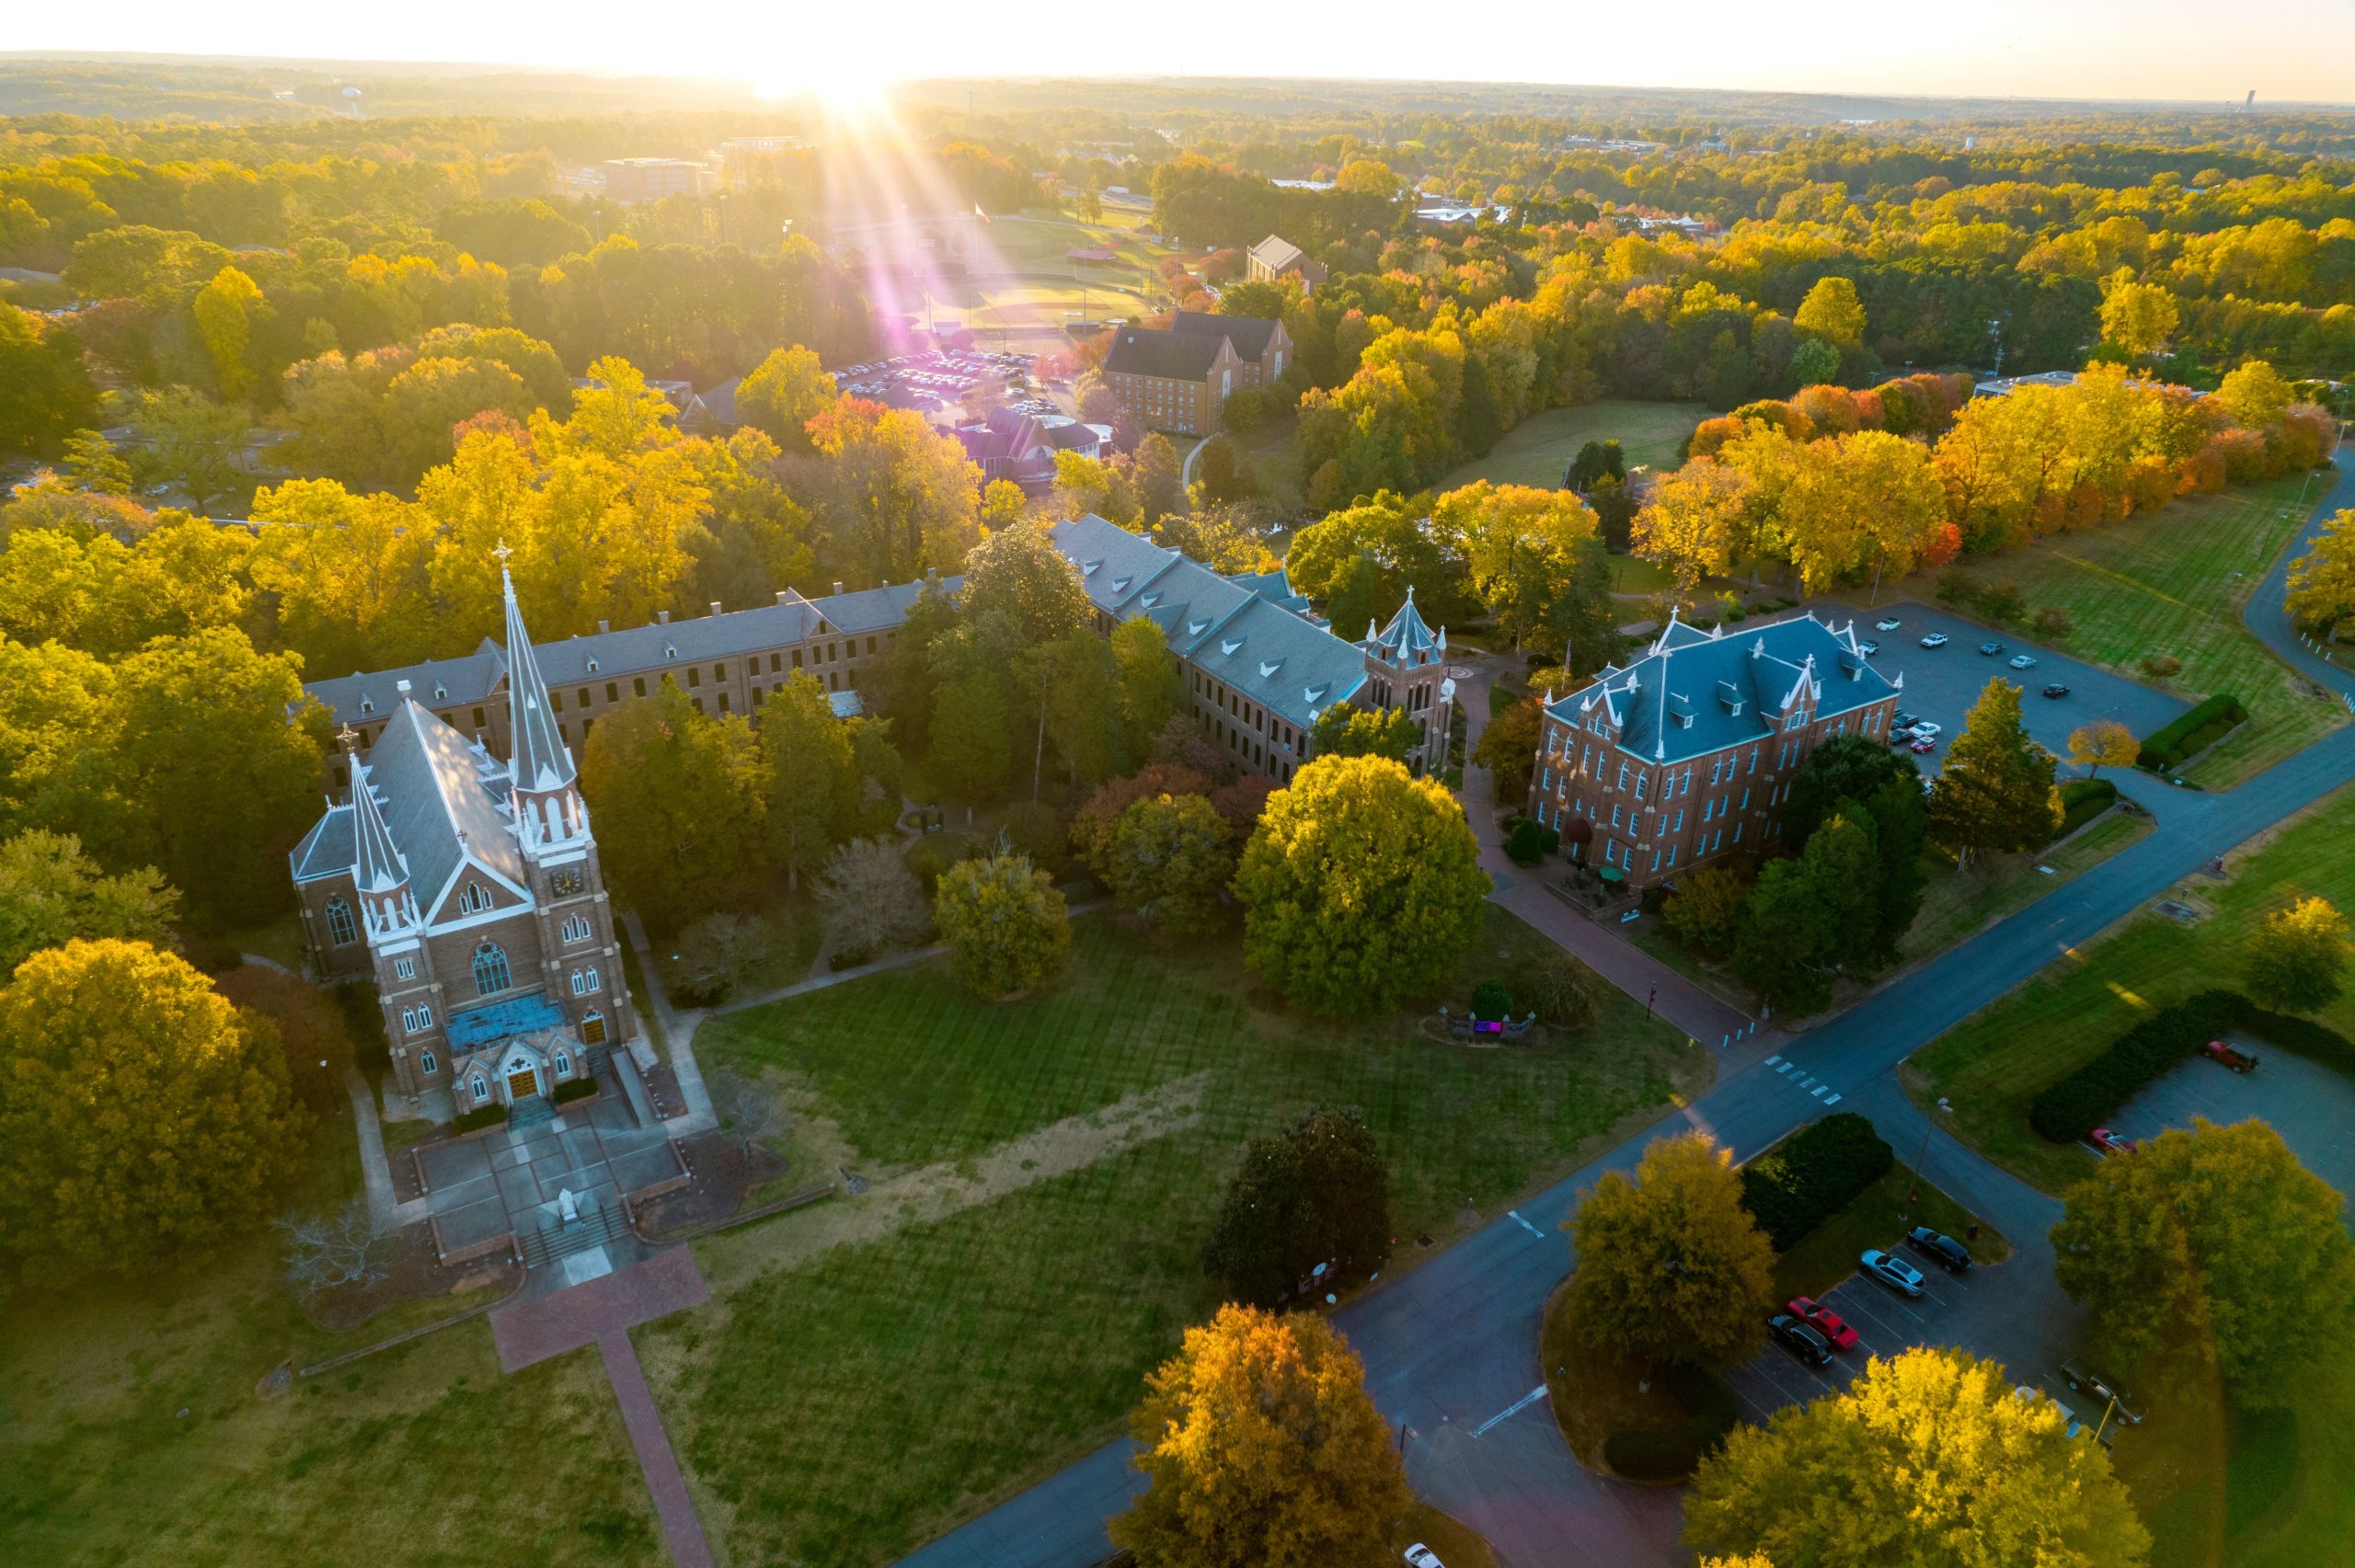 Belmont Abbey College launches 100 million campaign to fund campus